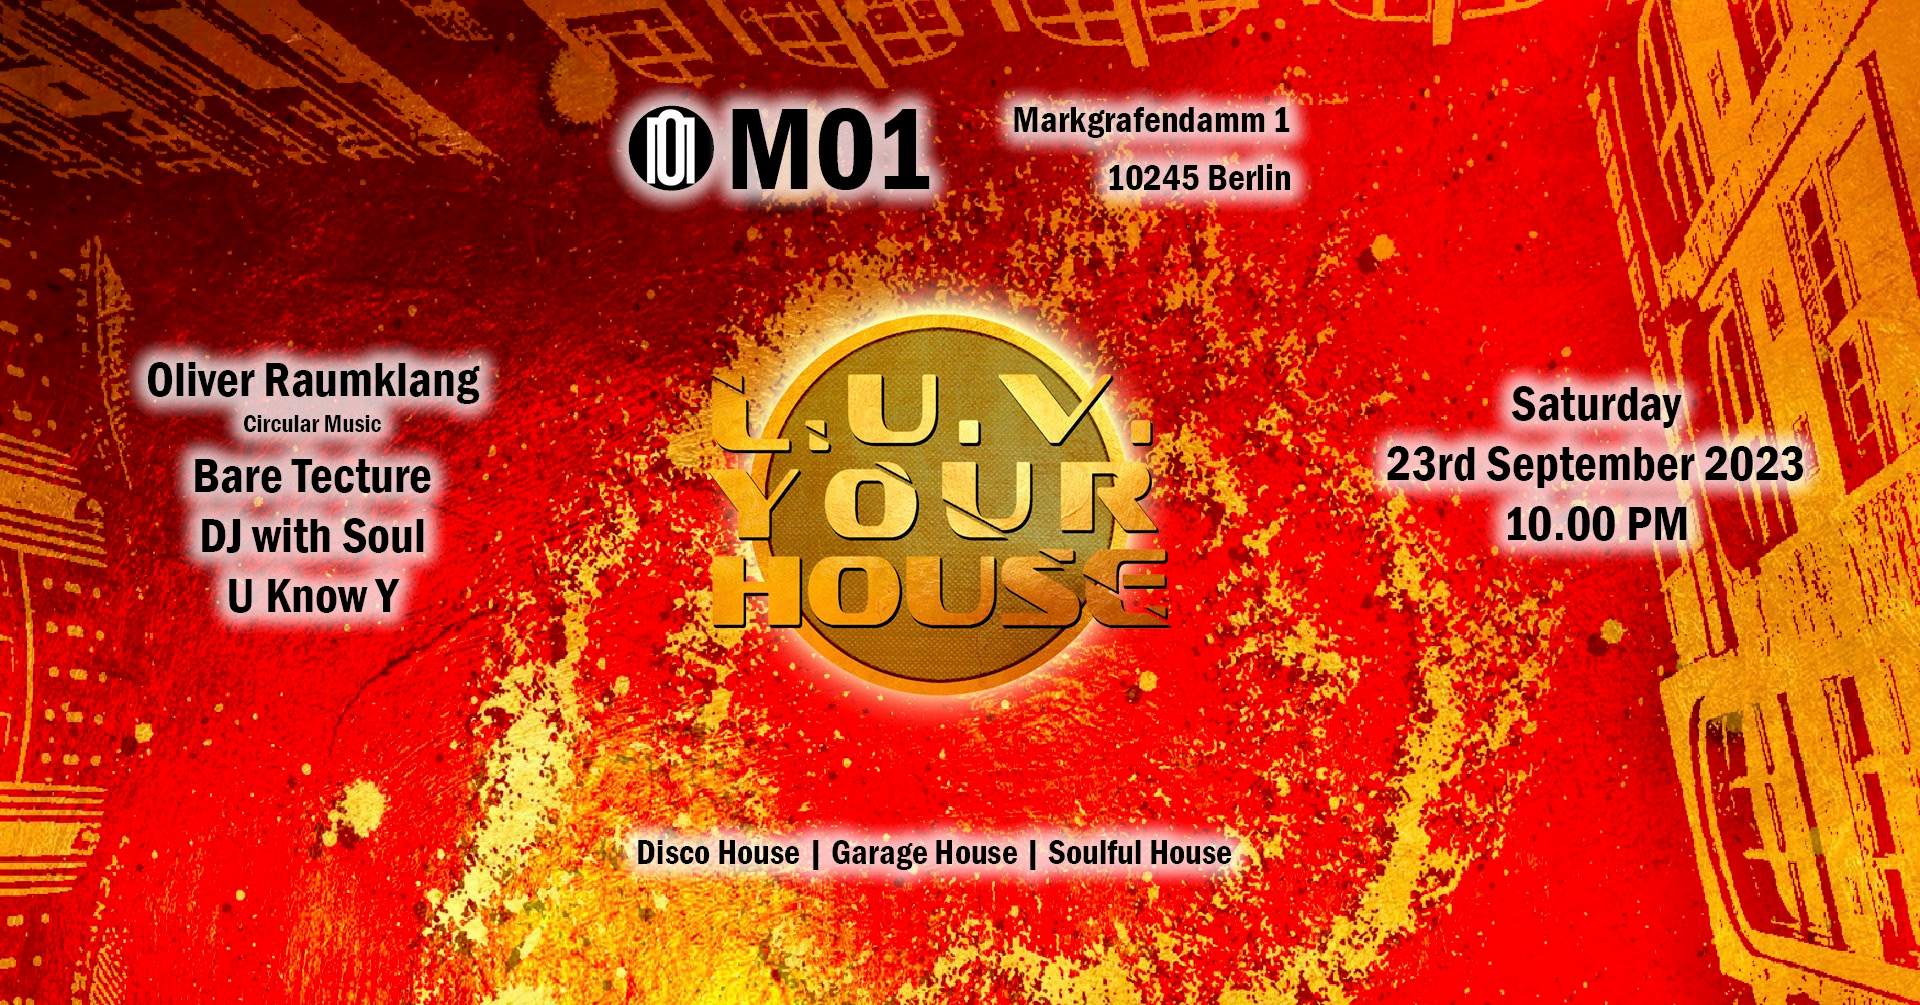 L.U.V. YOUR HOUSE # House Music : Oliver Raumklang, Bare Tecture, DJ with Soul, U Know Y, LUV - フライヤー表